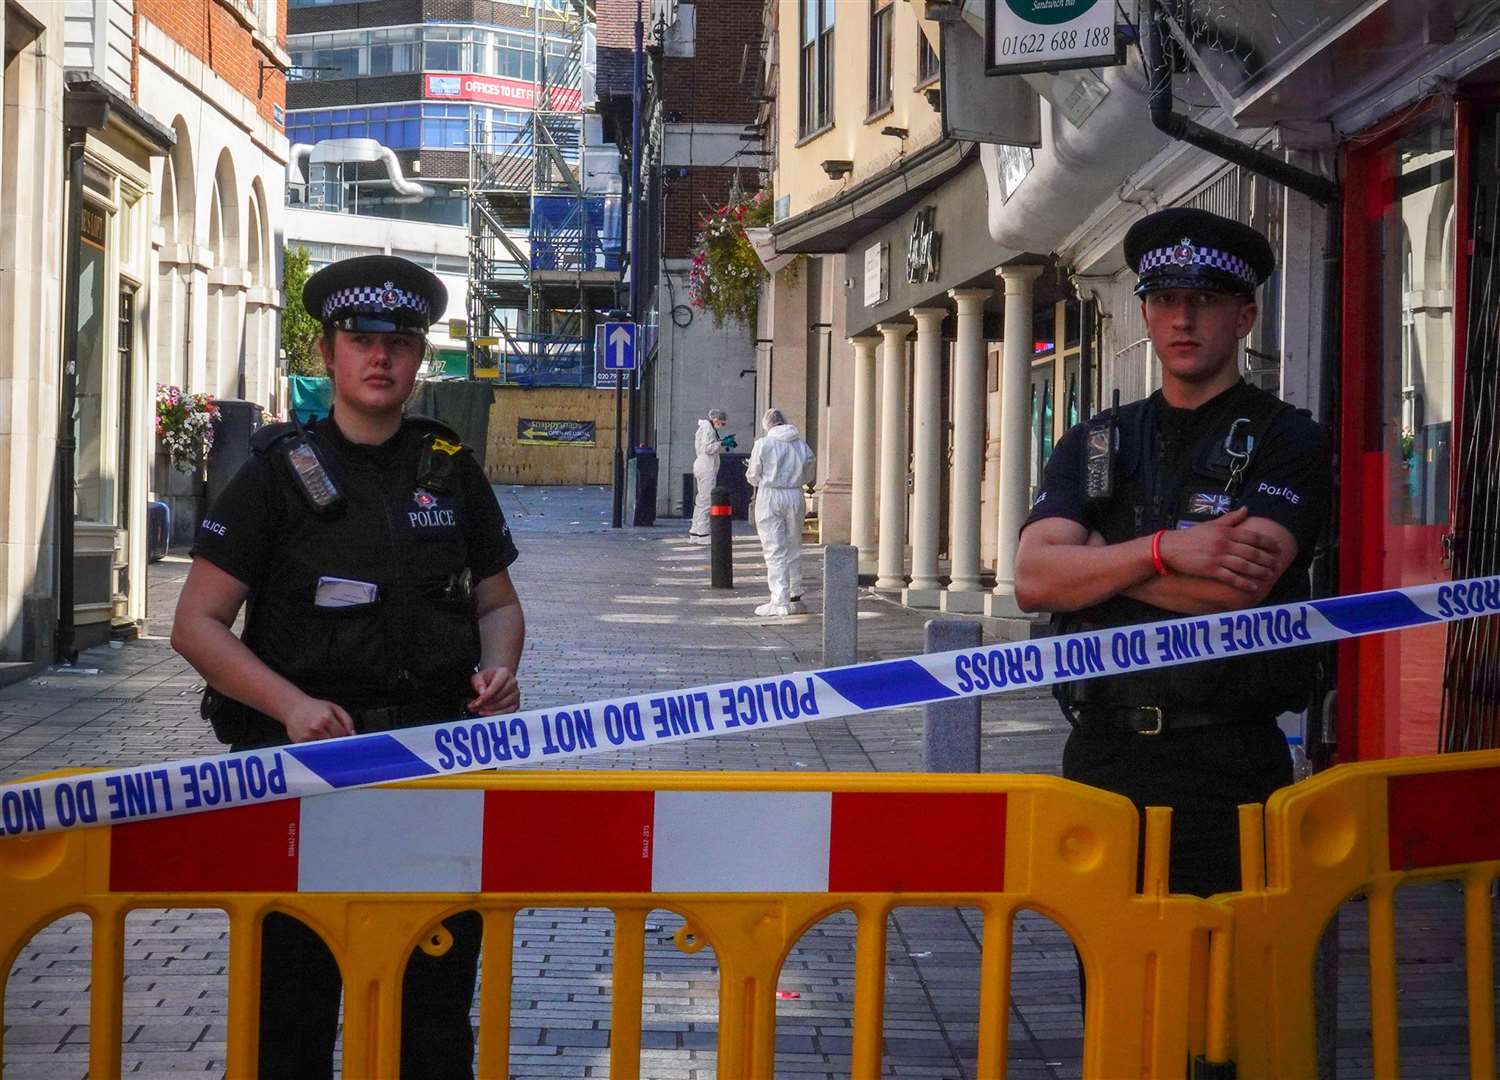 Forensics invetsigtae the area in Maidstone after Andre Bent was killed outside Gallery. Picture: Jim Bennett